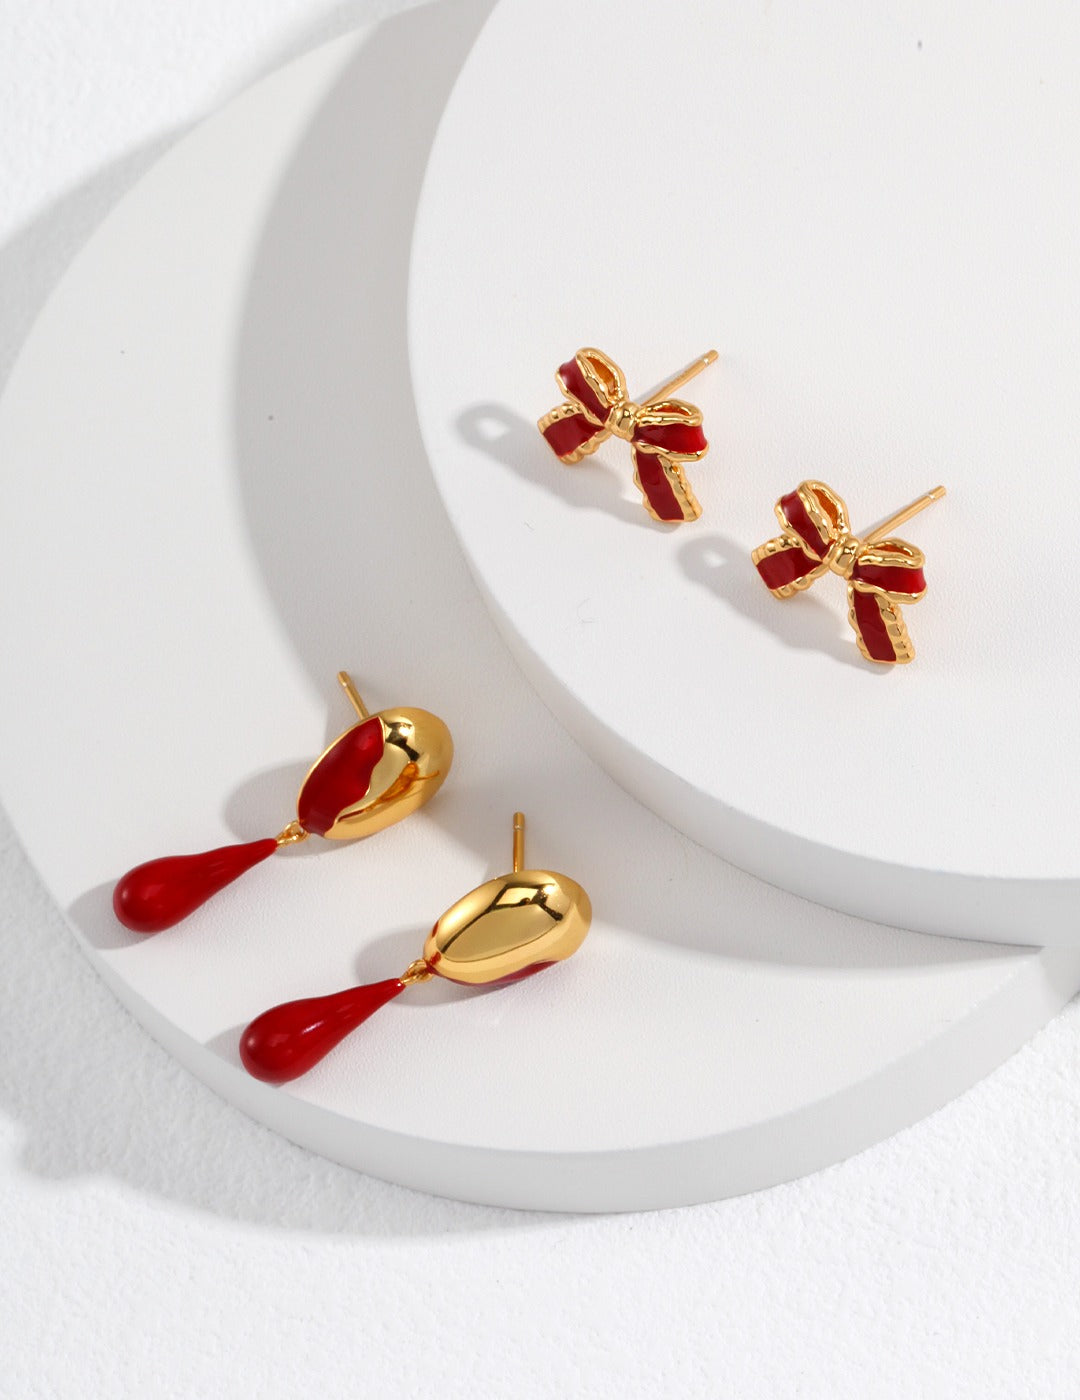 Regal Gold Baroque Earrings with Red Drip Glaze Detail that looks stunning